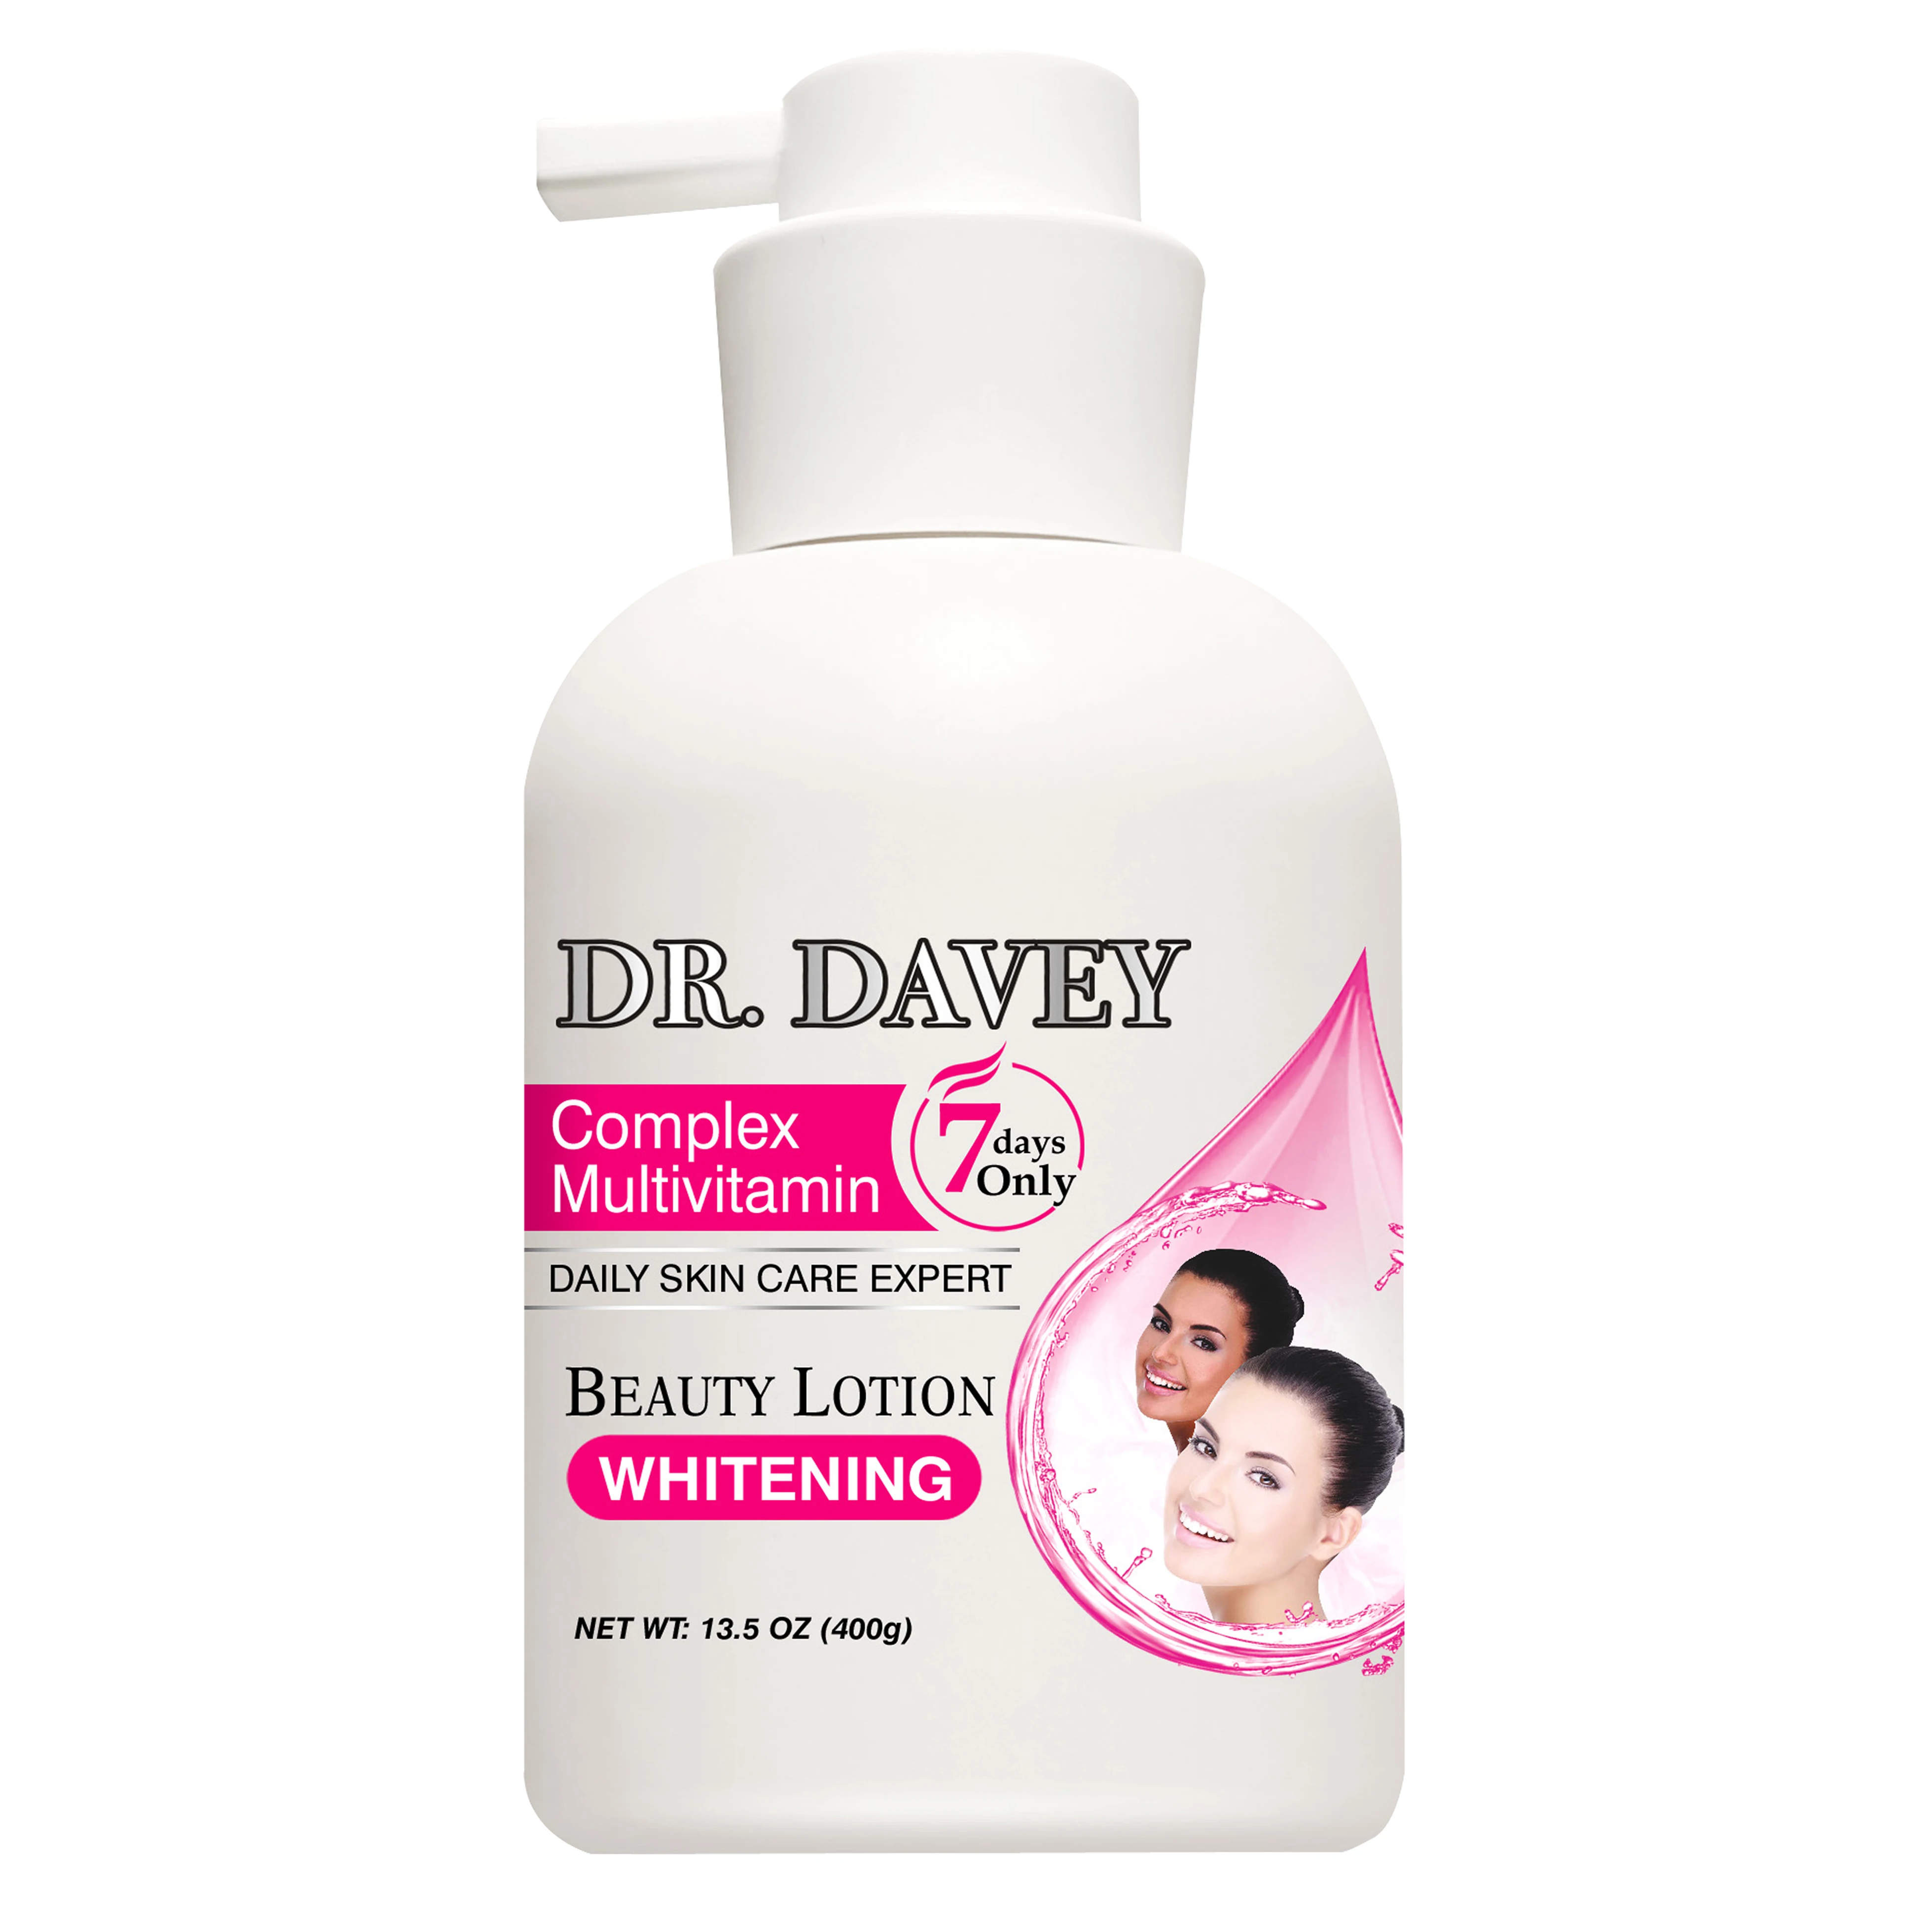 

DR. DAVEY Natural beauty whitening natural Vitamin E pearl body lotion, Milk white